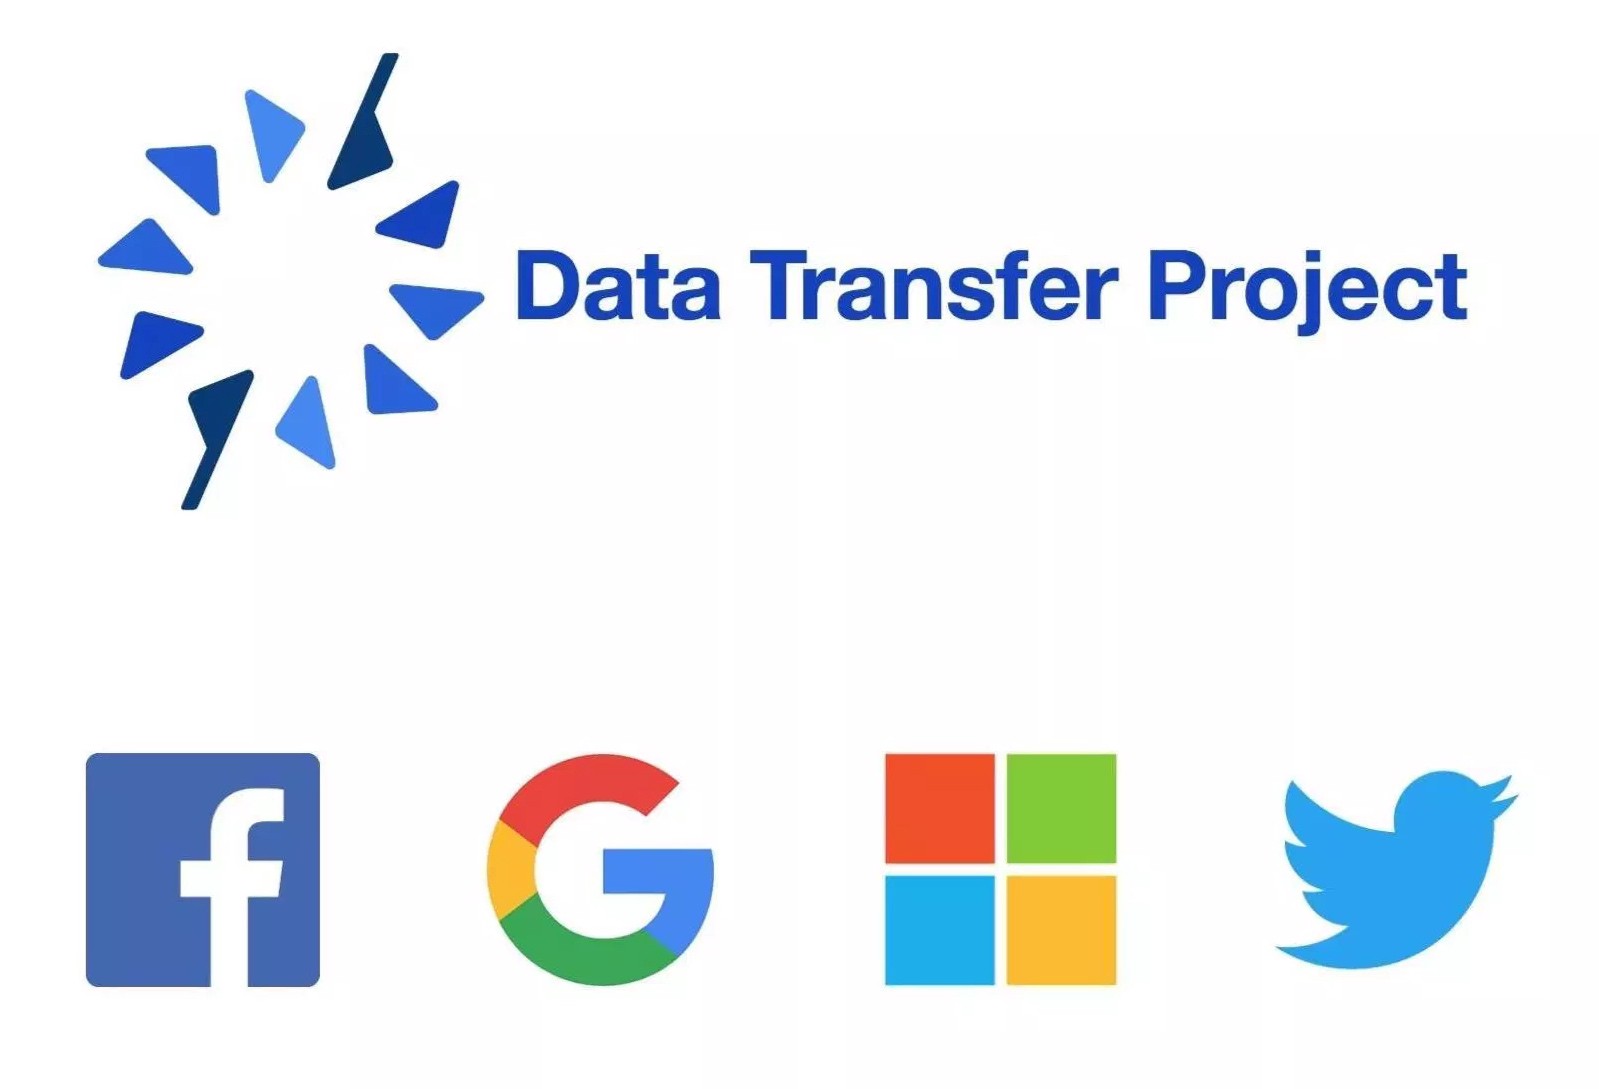 The Data Transfer Project